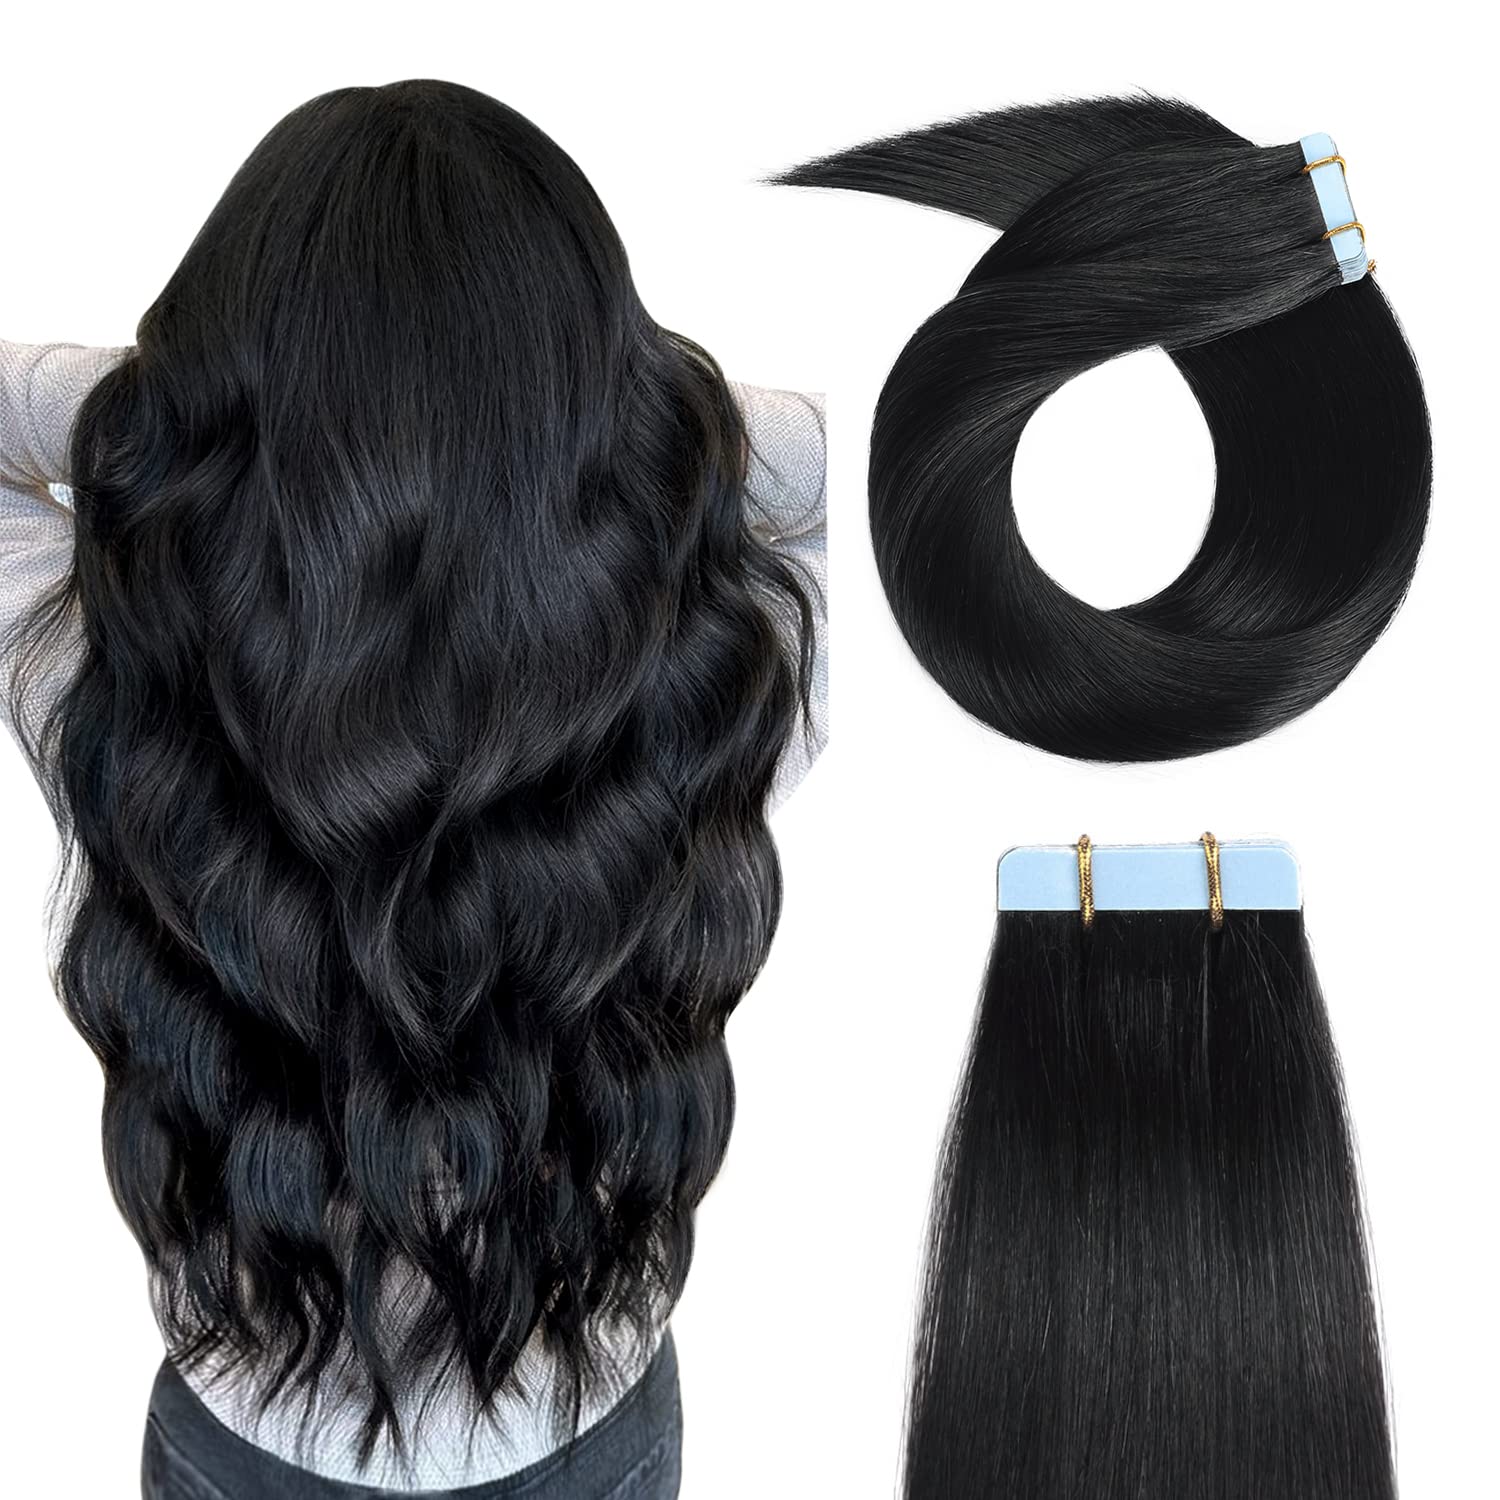 YILITE Tape in Hair Extensions Human Hair 14inch-24inch #1 Jet Black Tape in Hair Extensions Silky Straight Tape in Hair Extensions Human Hair Black Women 20pcs 50g Tape in ExtensionsHuman Hair